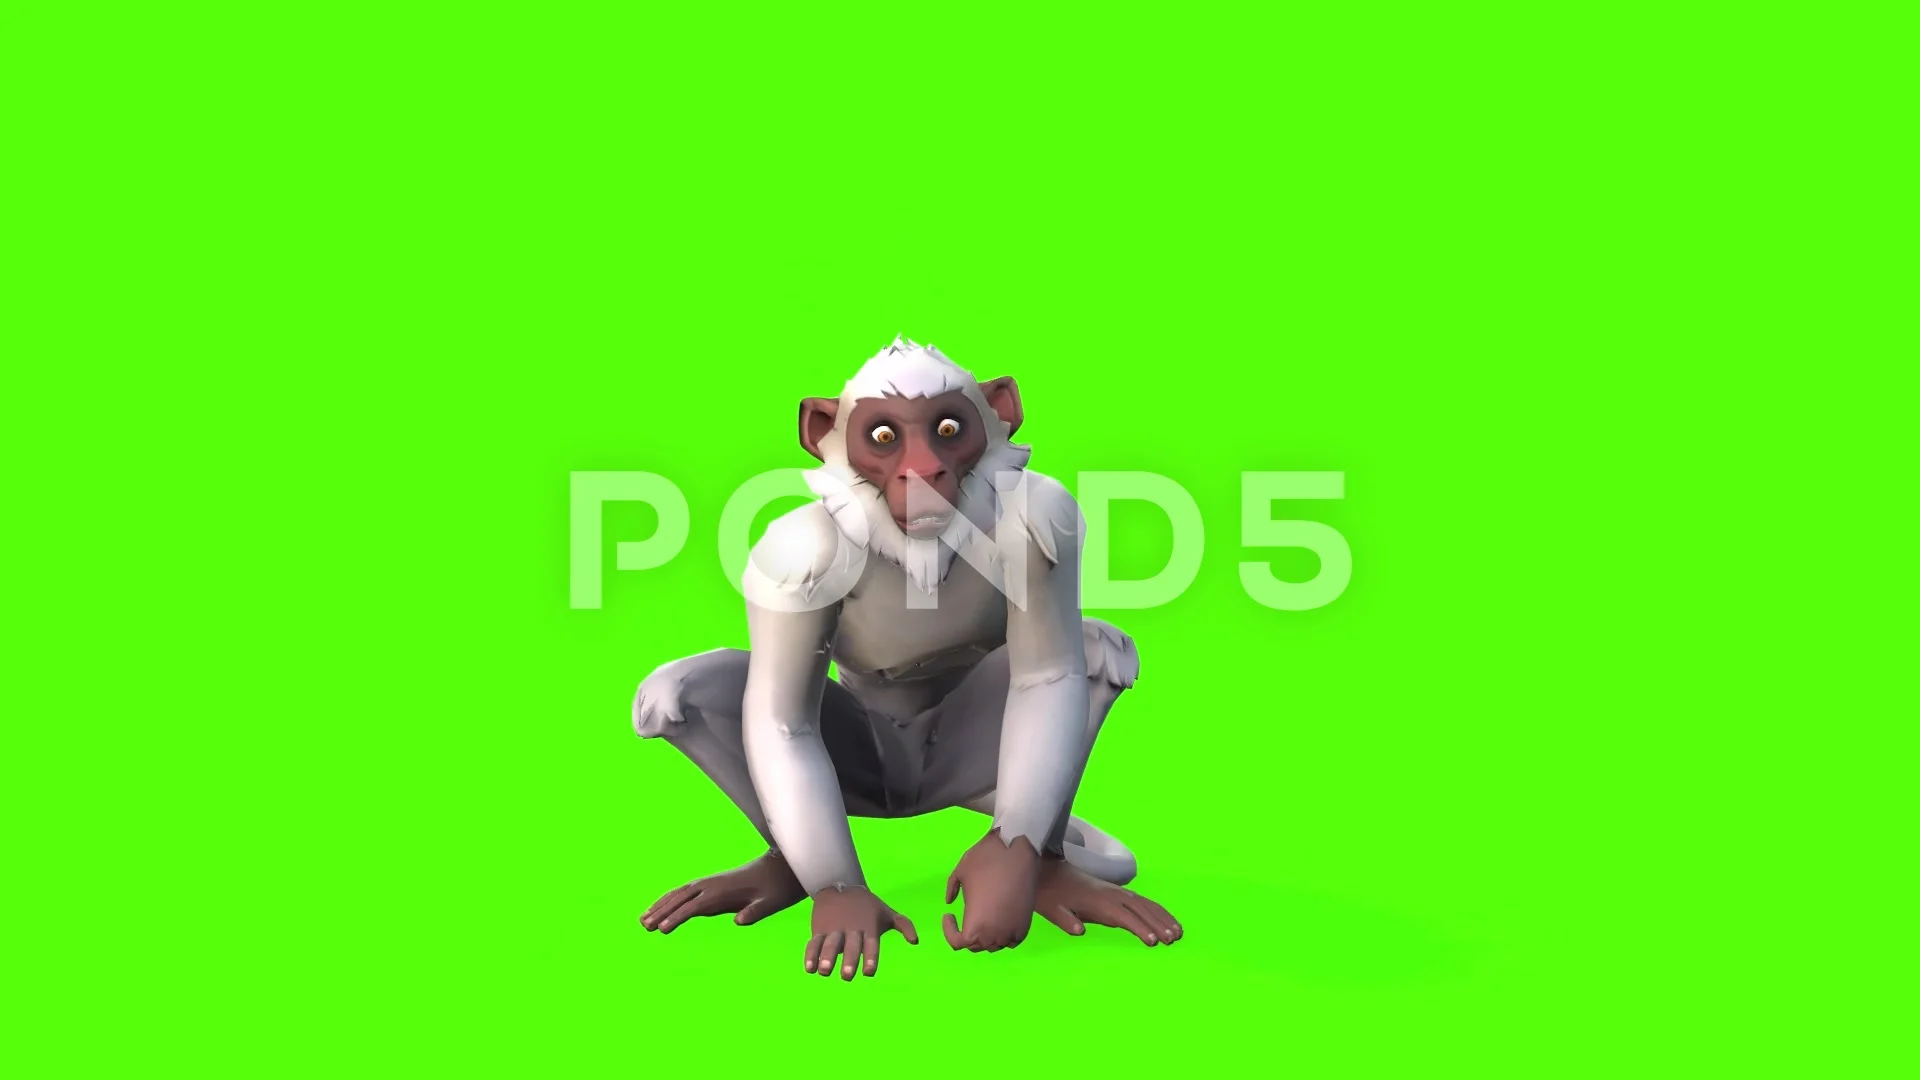 Monkey Green Screen Stock Footage ~ Royalty Free Stock Videos | Pond5